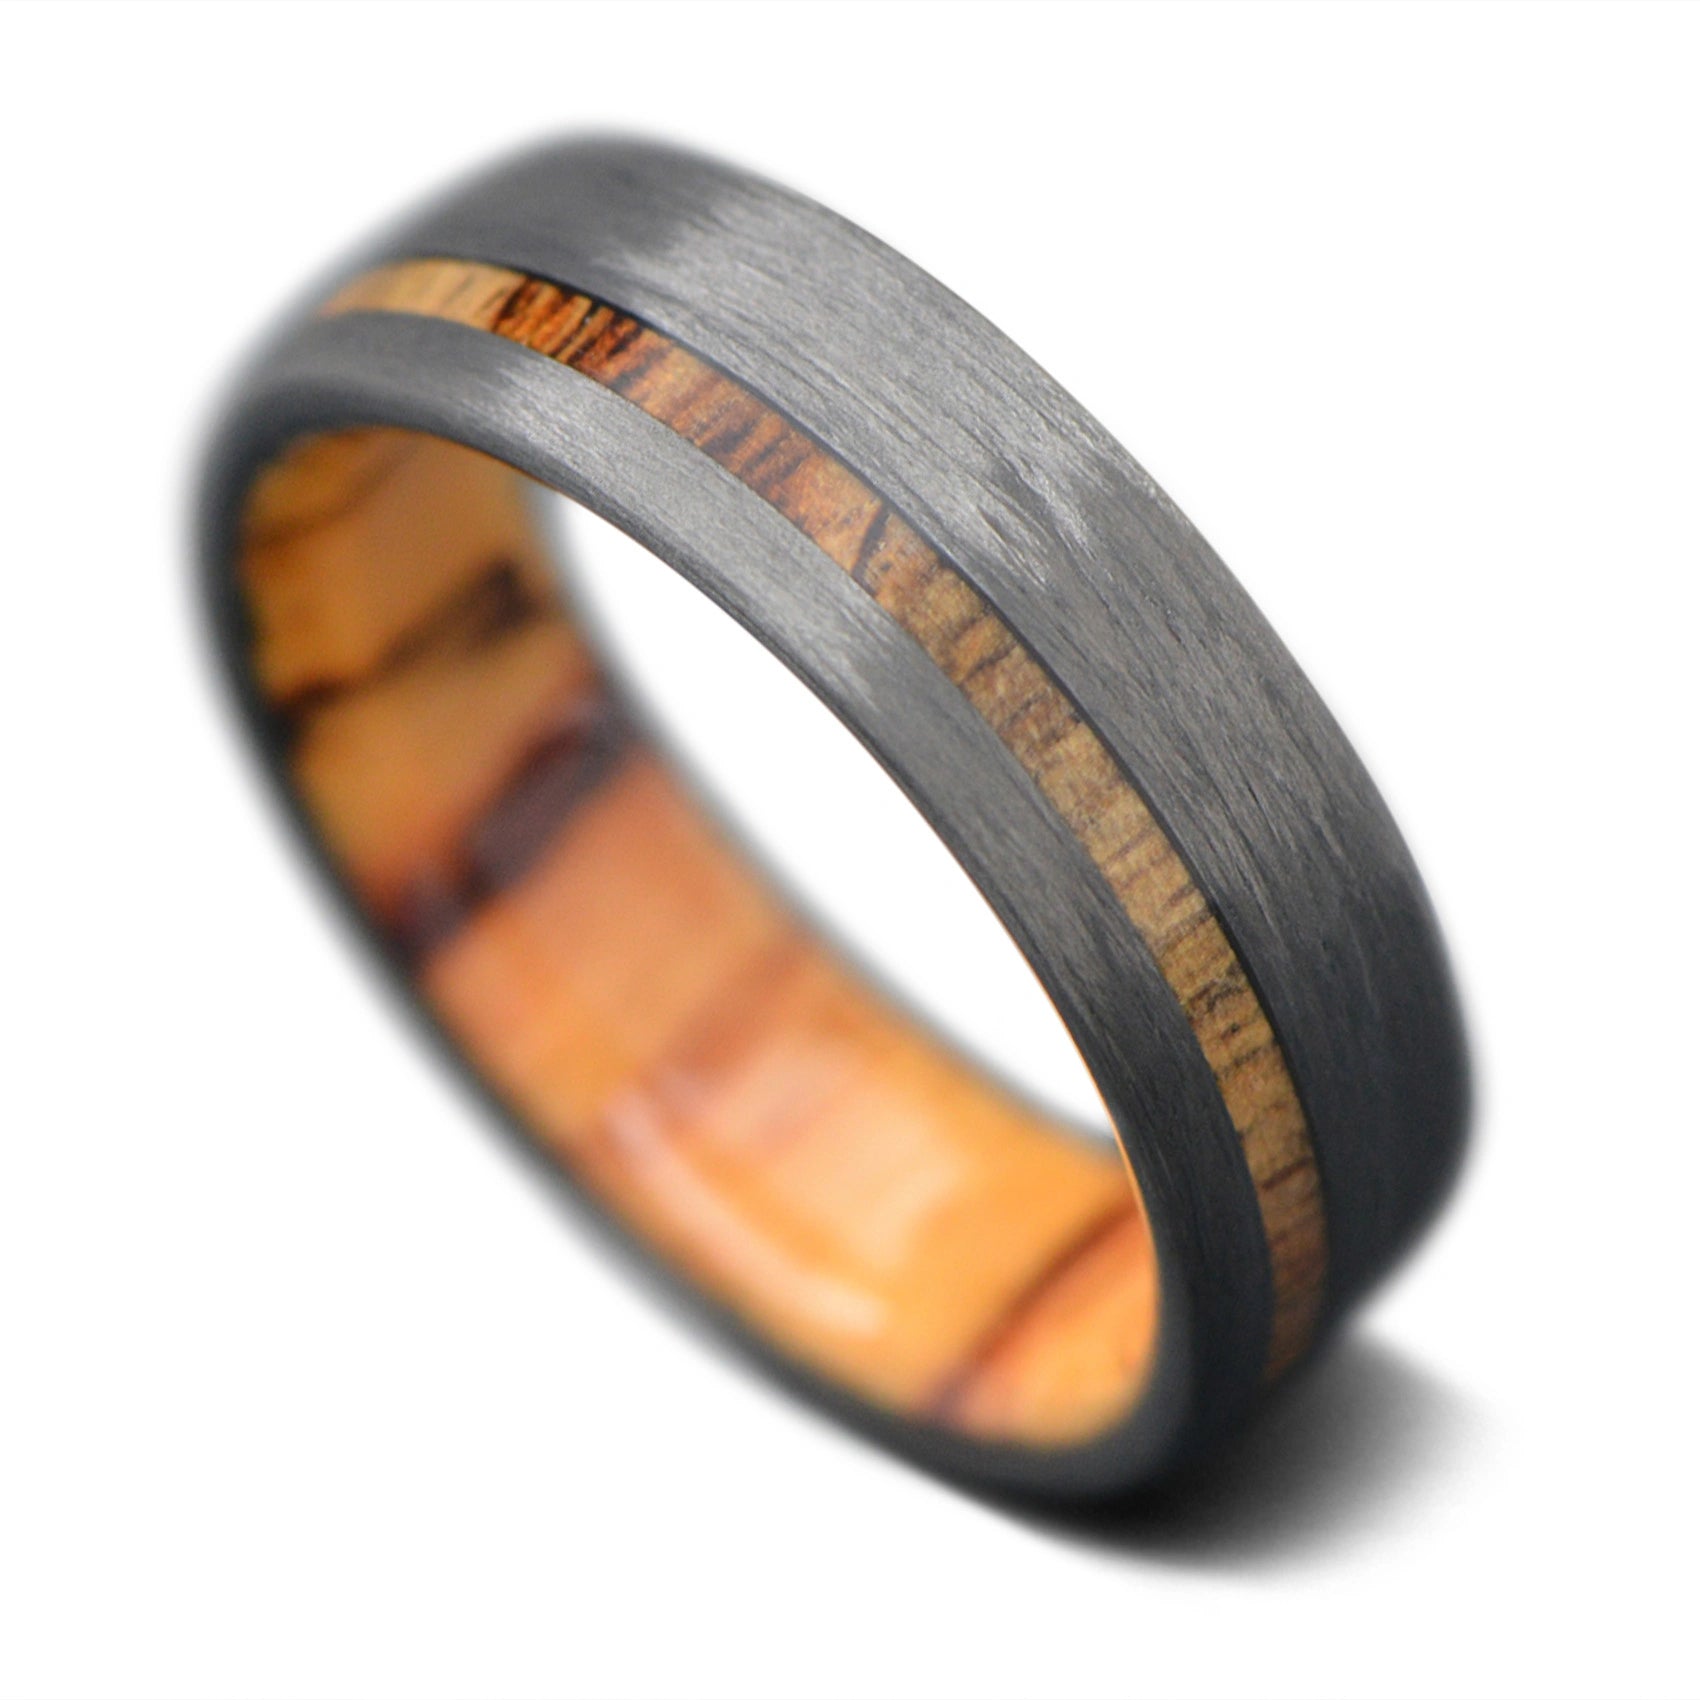 CarbonUni core ring with Spalted Tamarind inlay and inner sleeve, 7mm -THE VERTEX